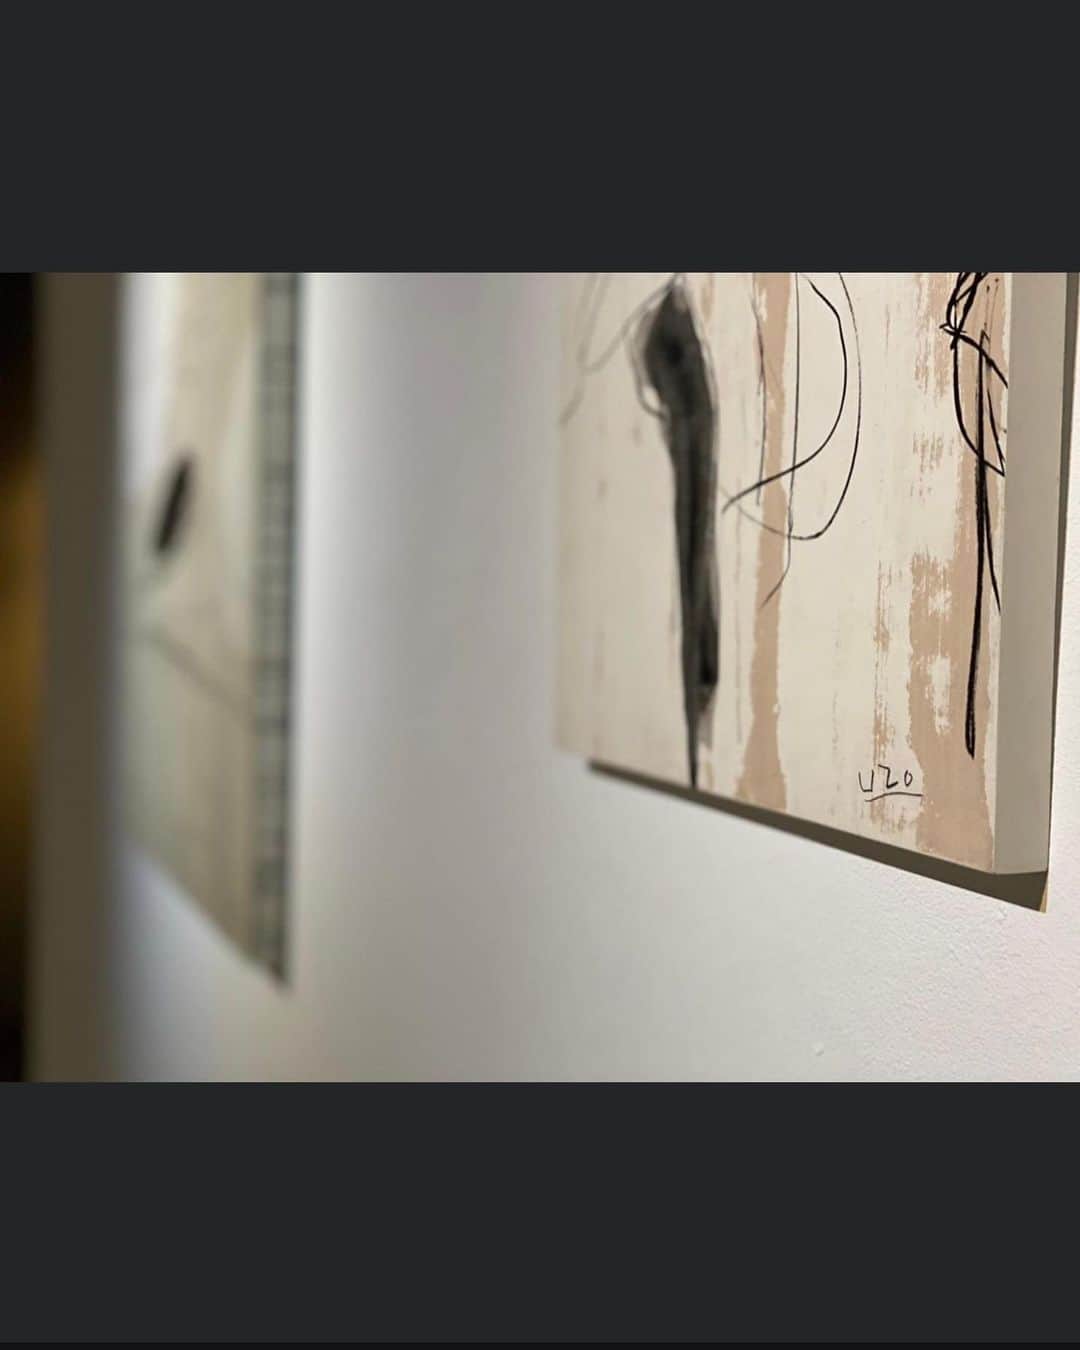 Uzo Hiramatsuさんのインスタグラム写真 - (Uzo HiramatsuInstagram)「Soka Art Tainan has posted information on the two-person exhibition from today on Facebook.  I will post the wonderful sentences as they are.  詠嘆萬物凋零之美以及人世的無常，日本文學中的「物哀」開創了西方藝術史上從未涉及的概念。日本自由律俳句大師 ＃種田山頭火 曾用「雪落在雪上」（雪へ雪ふるしづけさにをる）來描寫寧靜，他運用最單純的自然的景色來抒發自身的感悟，在清寂裡能夠觸摸到禪意，並獲得安寧。索卡藝術誠摯邀請您蒞臨2021年2月27日下午4點《＃鏡中鏡》＃平松宇造、＃高島進 雙個展開幕活動， 感受最獨特的日式美學。  Praising the beauty of the withering of all things and the feeling of the impermanence of the world, the "Mono no aware" in Japanese literature created a concept that has never been involved in the history of Western art. The Japanese haiku master Taneda Santoka once used "snow falling on the snow" to describe tranquility. He used natural scenery to express his own feelings and feel Zen in peace. The exhibition of "Spiegel im Spiegel" by ＃UzoHiramatsu and ＃SusumuTakashima will start tomorrow afternoon. Welcome to enjoy it.  參加活動了解更多 More Info https://reurl.cc/mq0YYY _______________________ 展名 |《鏡中鏡》平松宇造．高島進雙個展 展期 |2021/02/27(Sat.)-04/03 (Sat.) 開幕 |2021/02/27(Sat.) PM16:00 地點 | 索卡藝術·台南 台南市安平區慶平路446號 電話 | 06-297-3957  Exhibition: “Spiegel im Spiegel” Solo Exhibition of Uzo Hiramatsu and Susumu Takashima Date: 2021/02/27(Sat.)-04/03 (Sat.) Opening: 2021/02/27(Sat.) PM16:00 Venue: No. 446, Qingping Rd., Anping Dist., Tainan City 708 Tel: 06-297-3957  #台湾　#台南　#索卡藝術　##SokaArt  #Taiwan  #Tainan #fukuoka #contemporaryart #painting #drawing #mixedmedia #flower」2月27日 15時45分 - uzo_hiramatsu